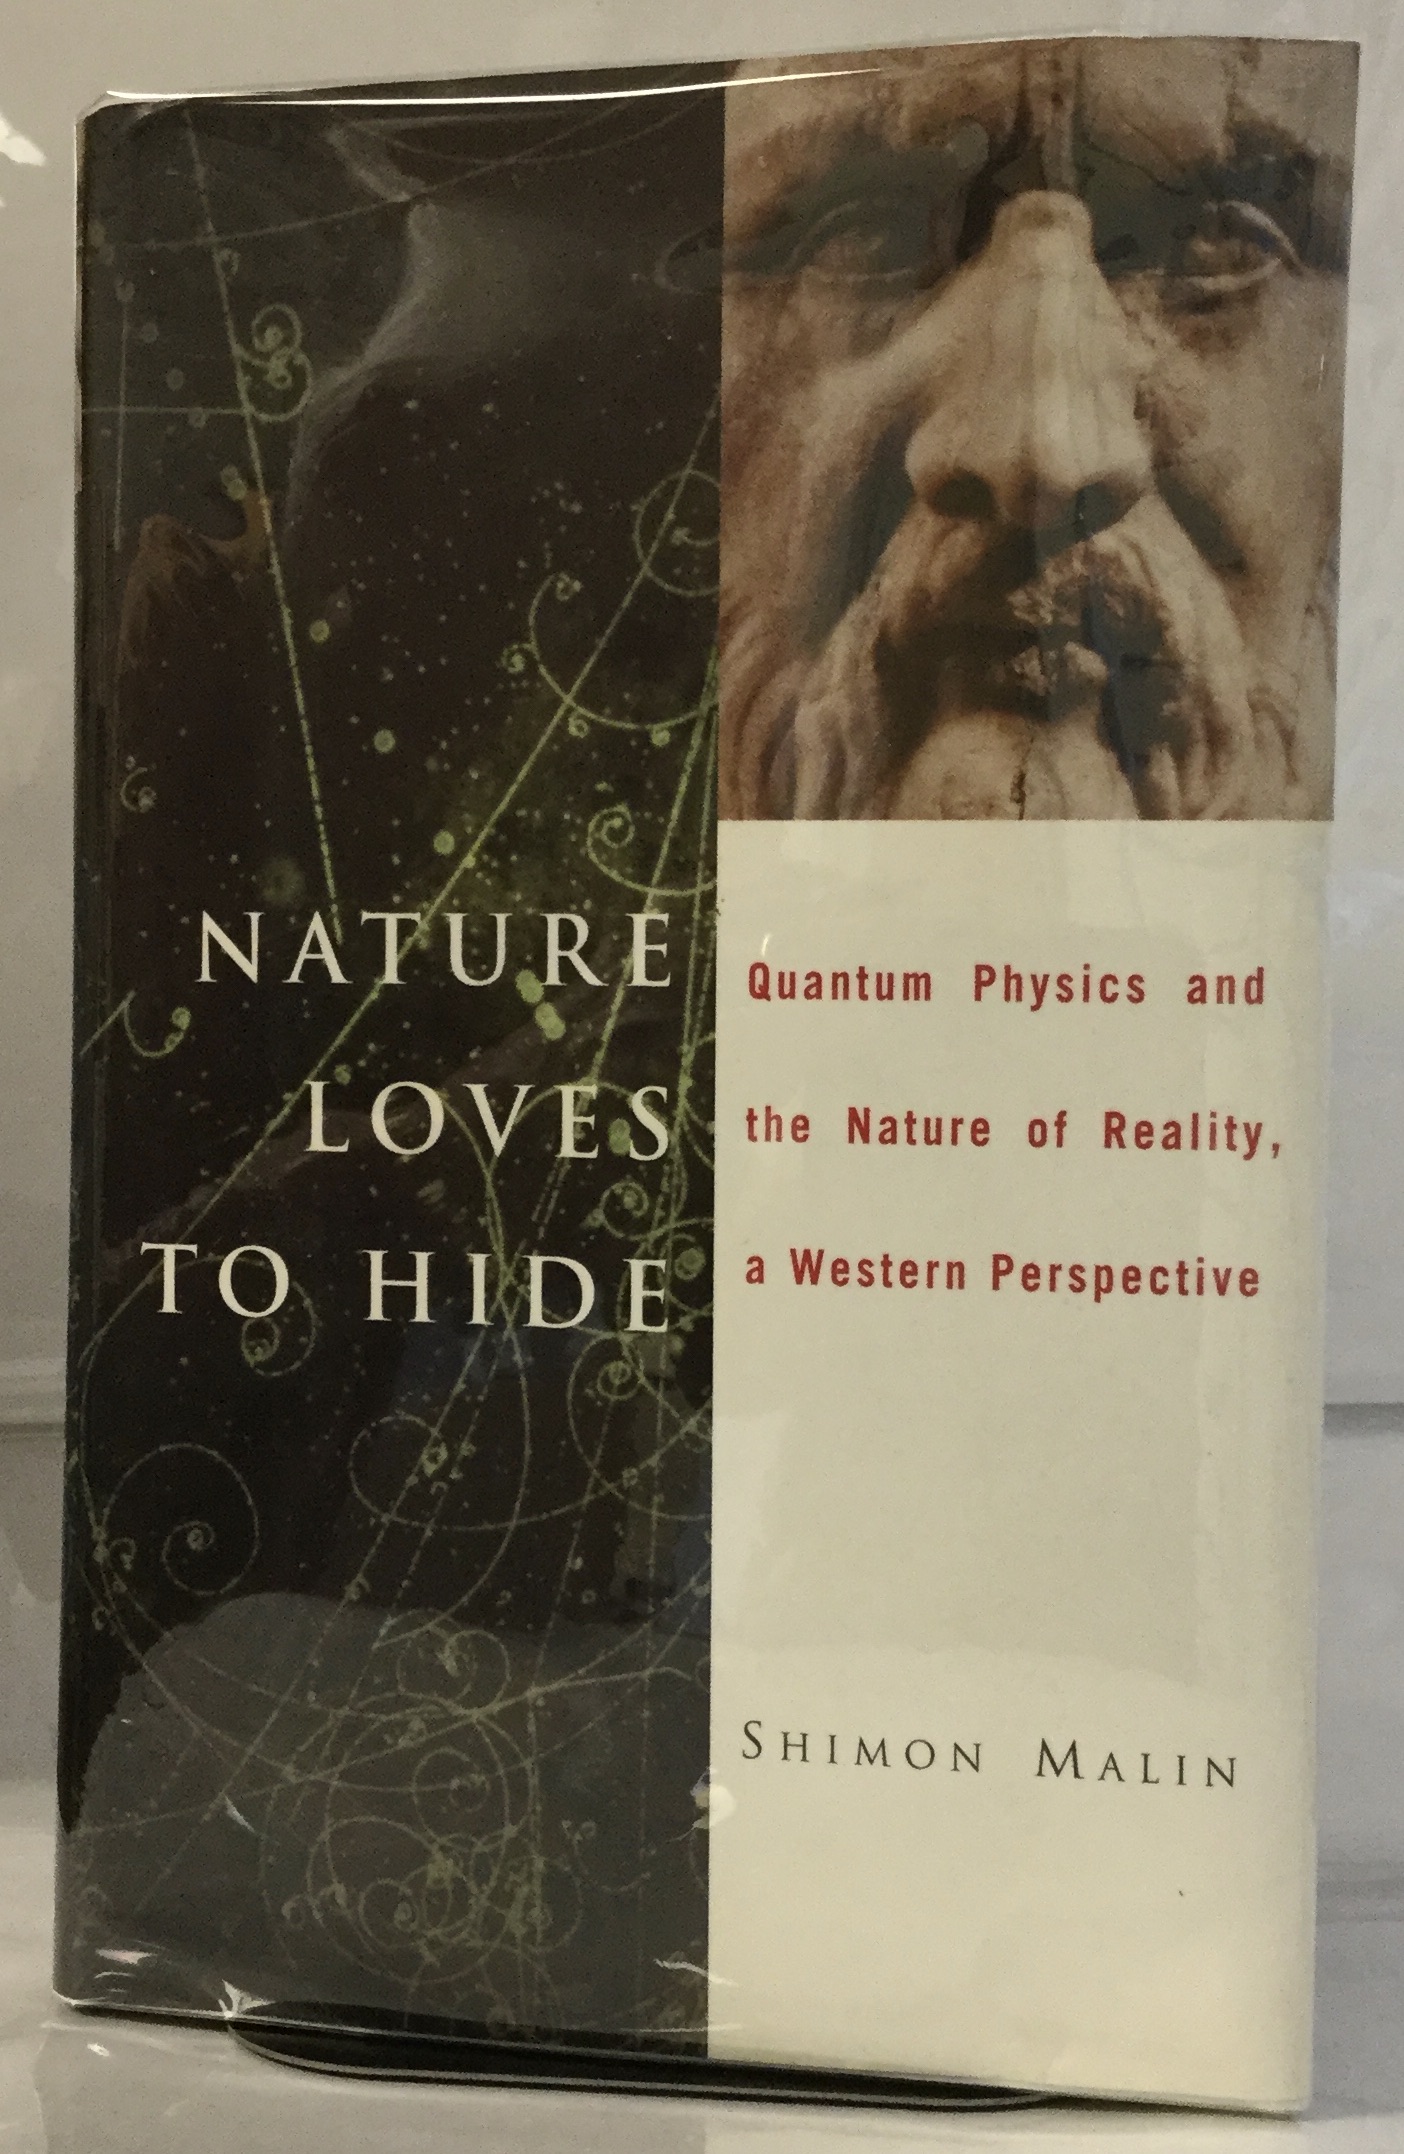 Nature Loves to Hide Quantum Physics and Reality, a Western Perspective Malin, Shimon [Very Good] [Hardcover] VG, in NF DJ. First printing. Minimal signs of wear to exterior, binding solid and straight, some underlining and marginal notations with ink marks on outer edge detract, else interior clean and unmarked. Unclipped jacket bright and fully intact. Clearly read, but a nice copy in a very nice jacket. Presentation letter signed by author together with enclosed essay by author laid in.